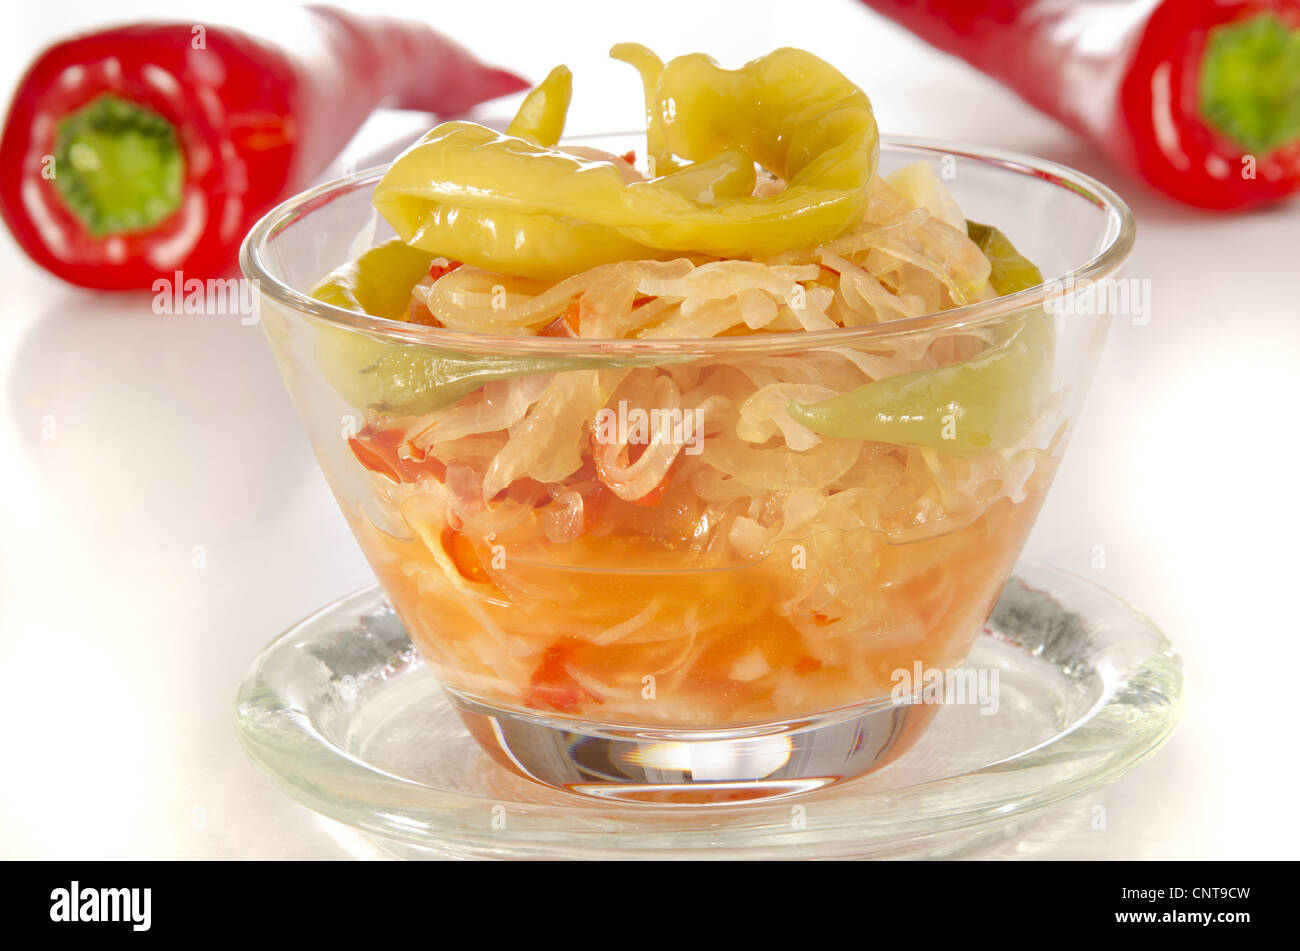 sour salad with cabbage and red pepper Stock Photo